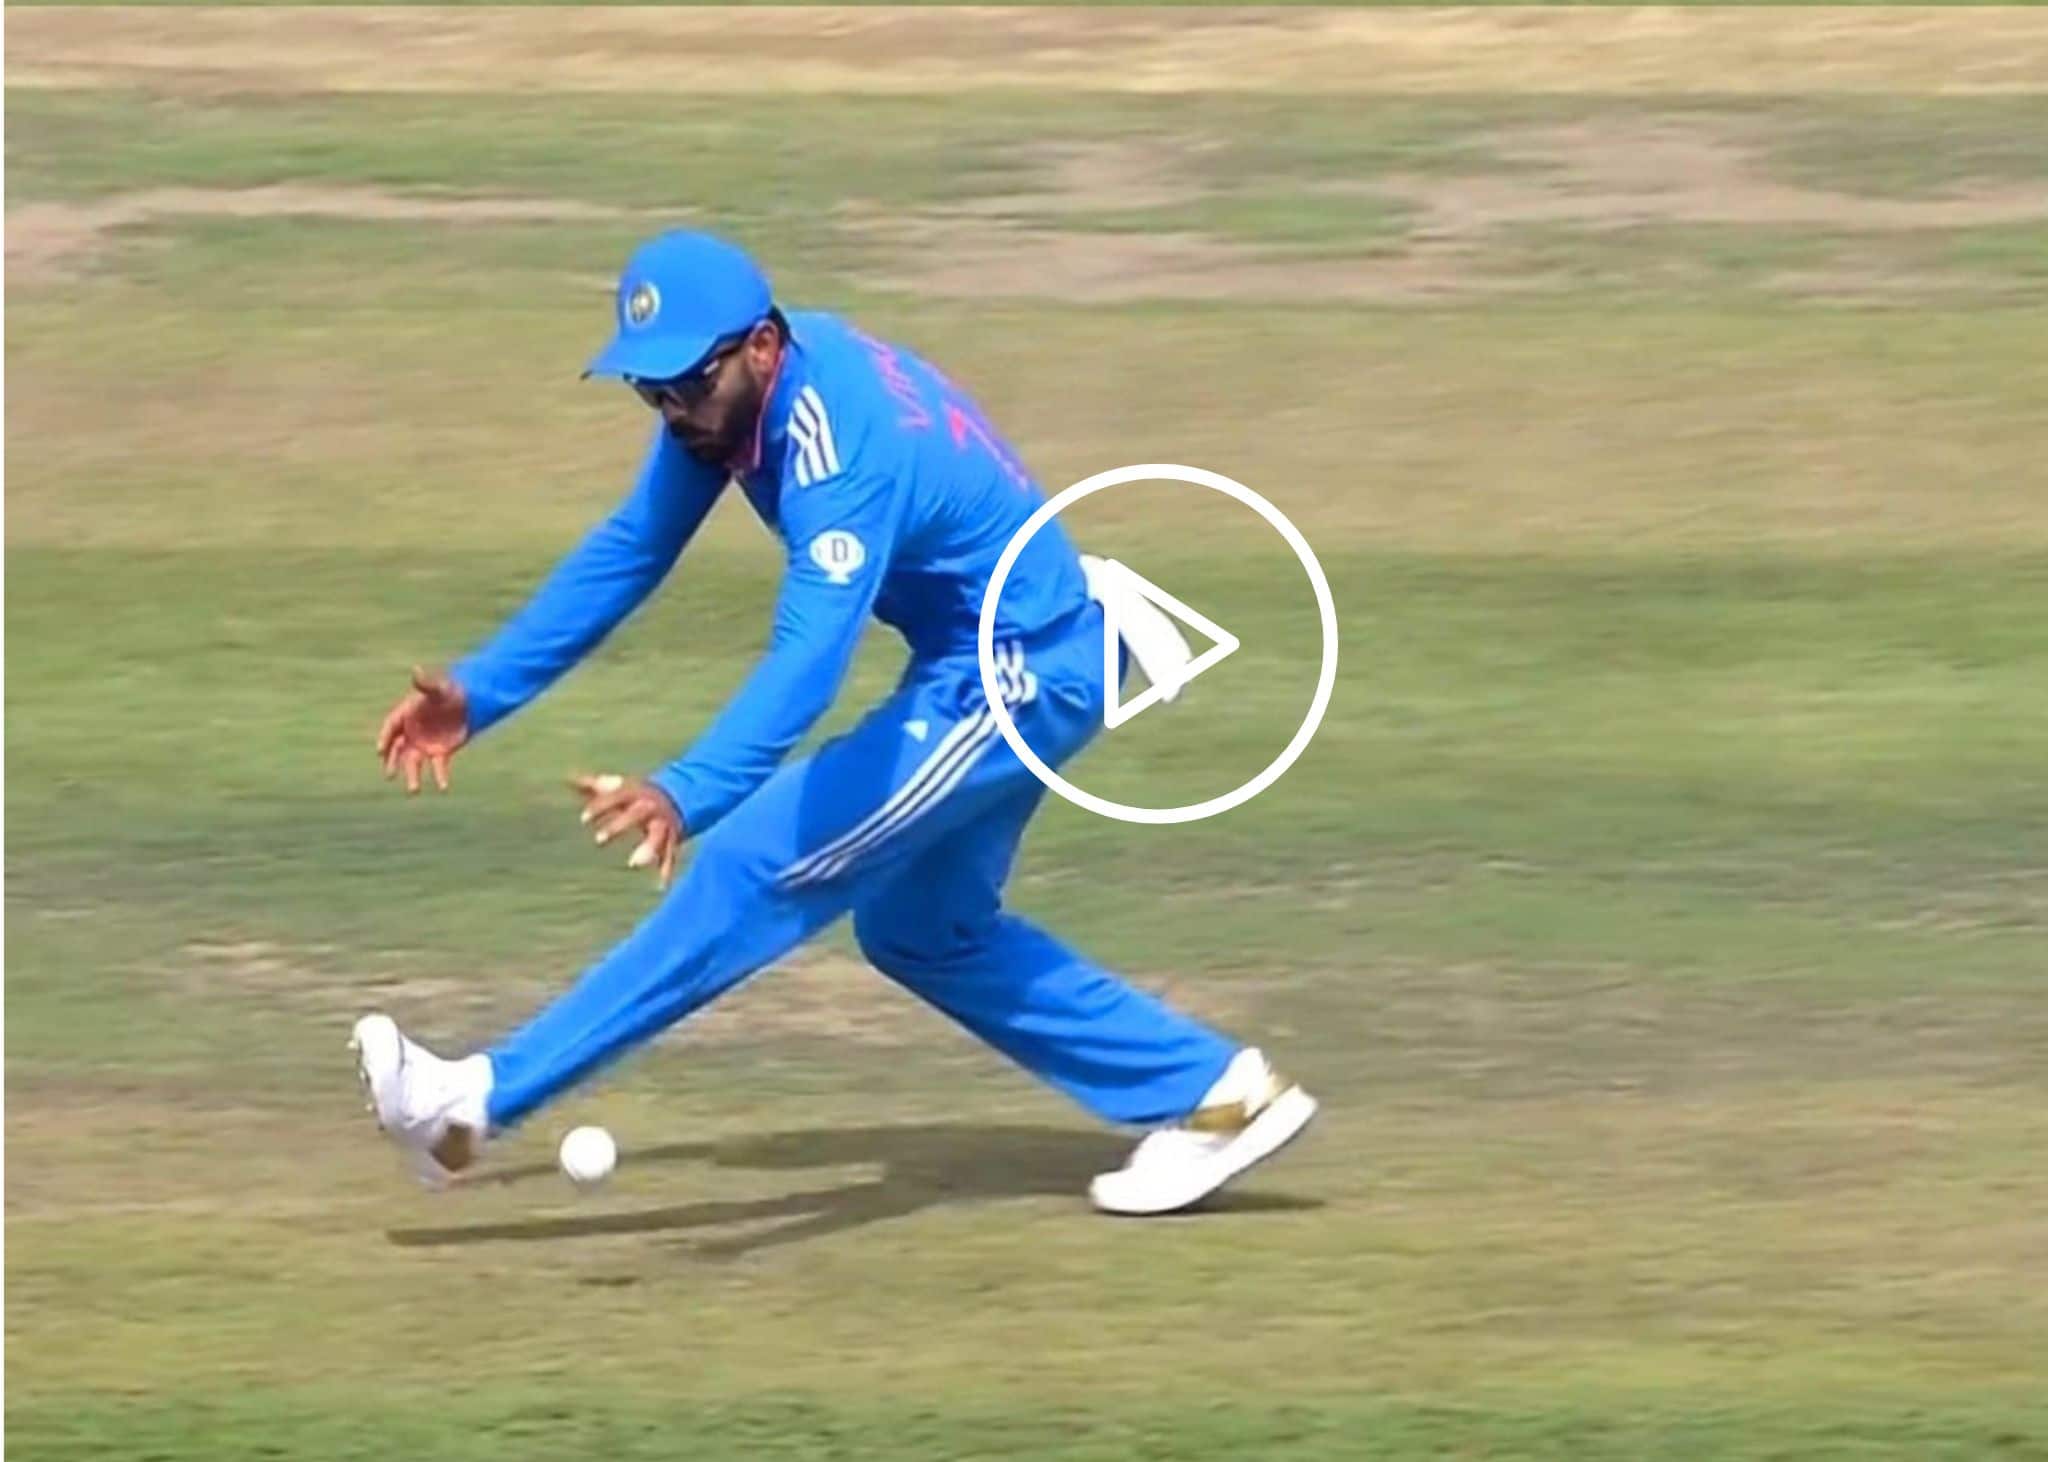 [Watch] Virat Kohli Embarrassed After Dropping Simple Catch for India vs Nepal